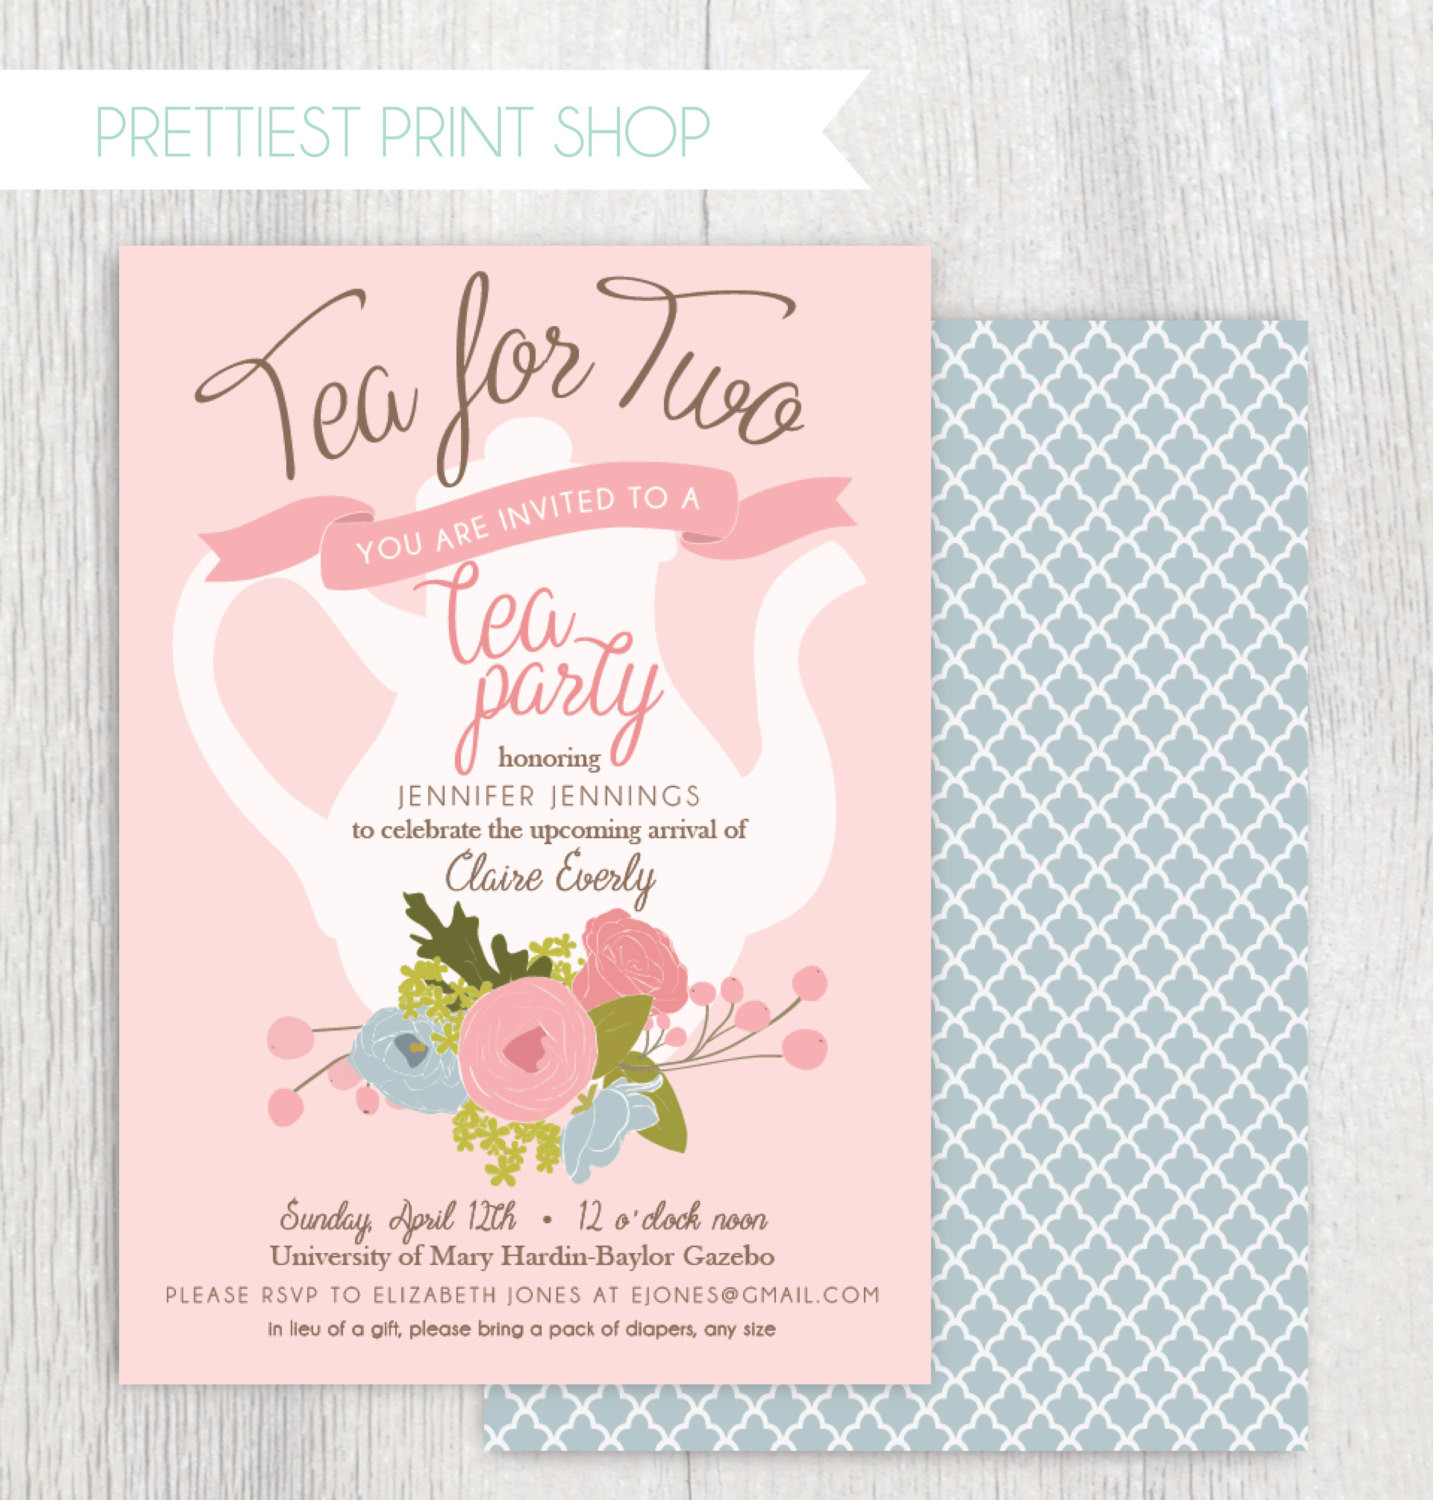 Baby Shower Invitations Tea Party
 Printable tea party baby shower invitation Tea pot Floral